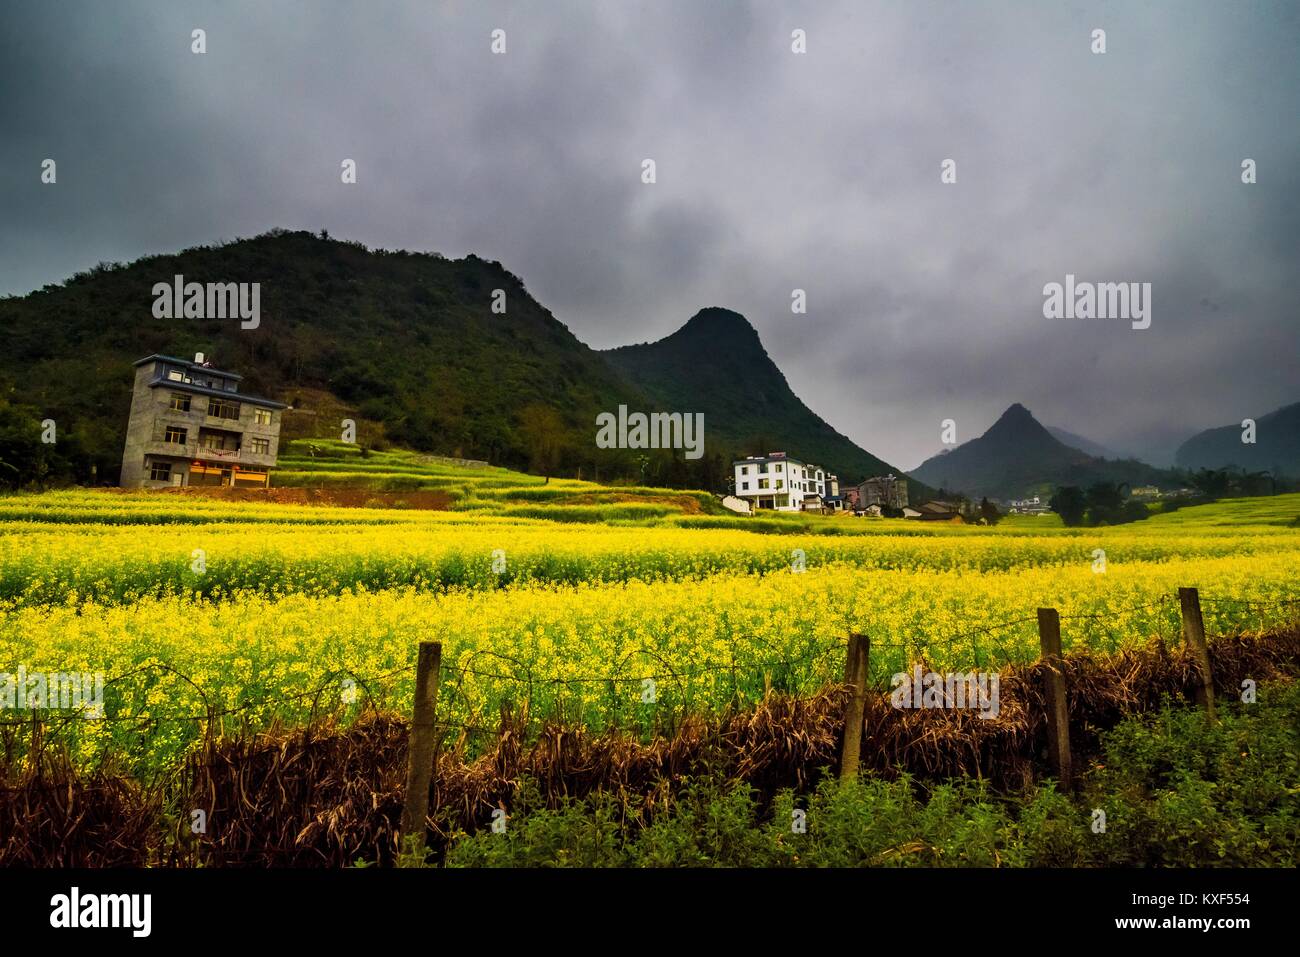 Canola field, rapeseed flower field with the mist in Luoping, China Stock Photo